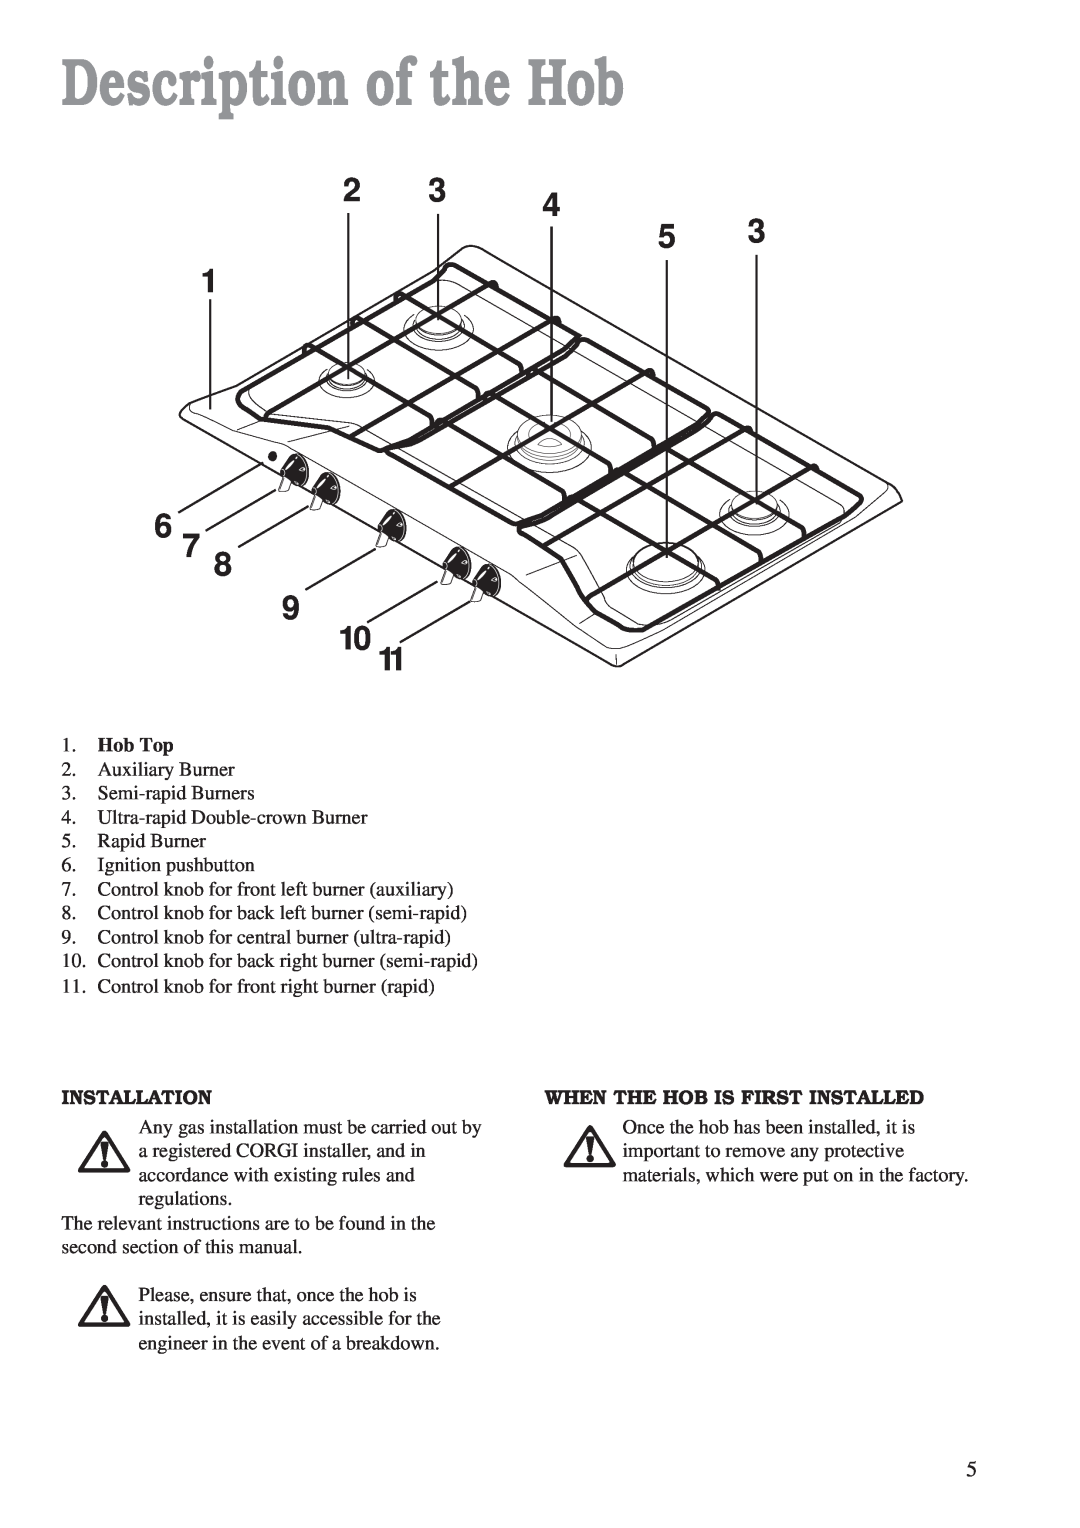 Zanussi ZGF 982 manual Description of the Hob, Hob Top, Installation, When The Hob Is First Installed 